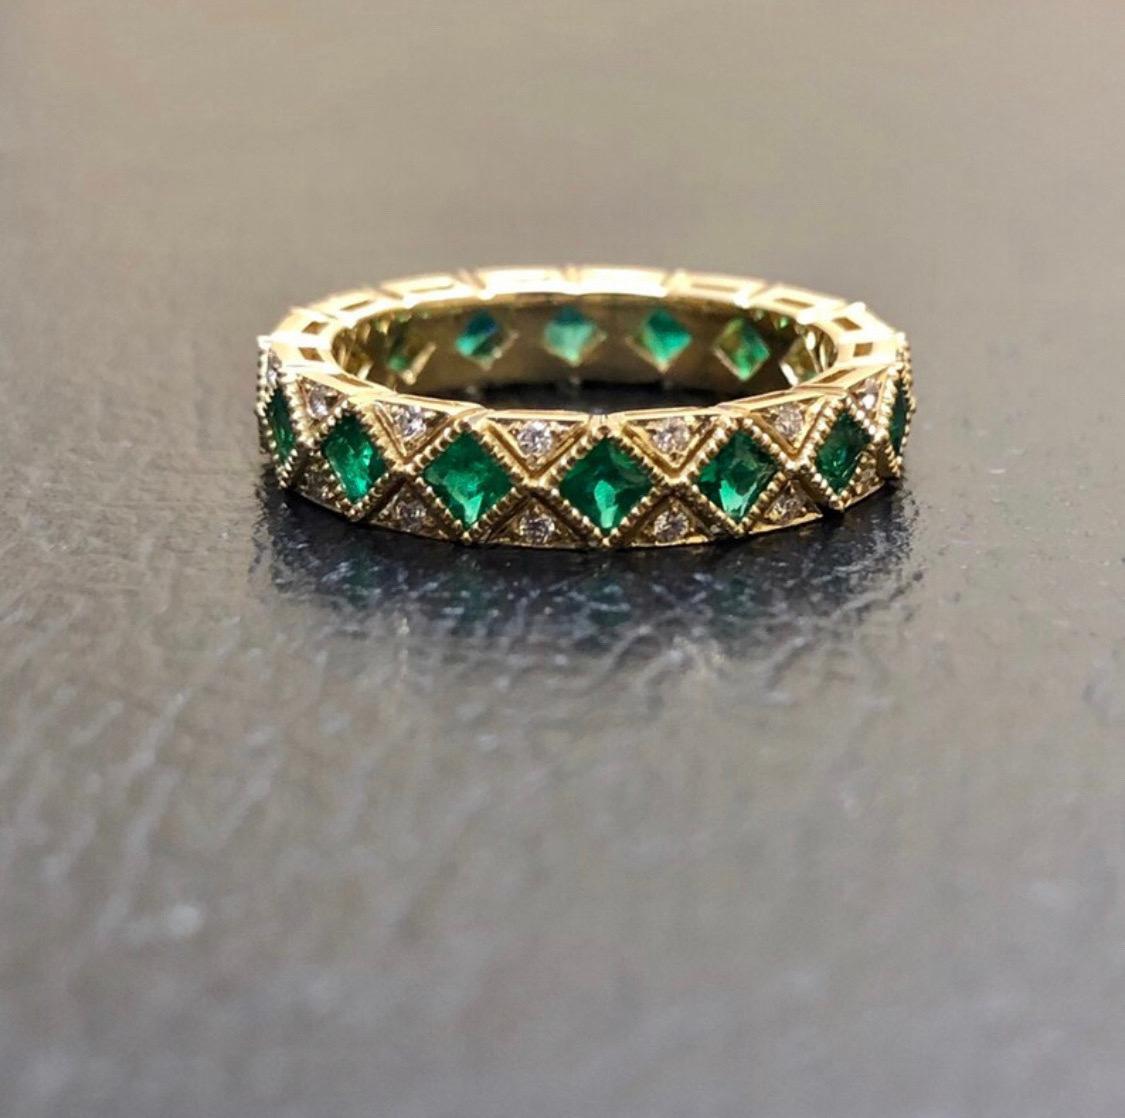 Dekara Designs Collection

Art Deco Inspired Genuine Princess Cut Emerald Diamond Eternity Diamond Band.

This piece is handmade to perfection, from the stone setting to the shine finish. High end heirloom Emerald and diamond band.

Metal- 18K